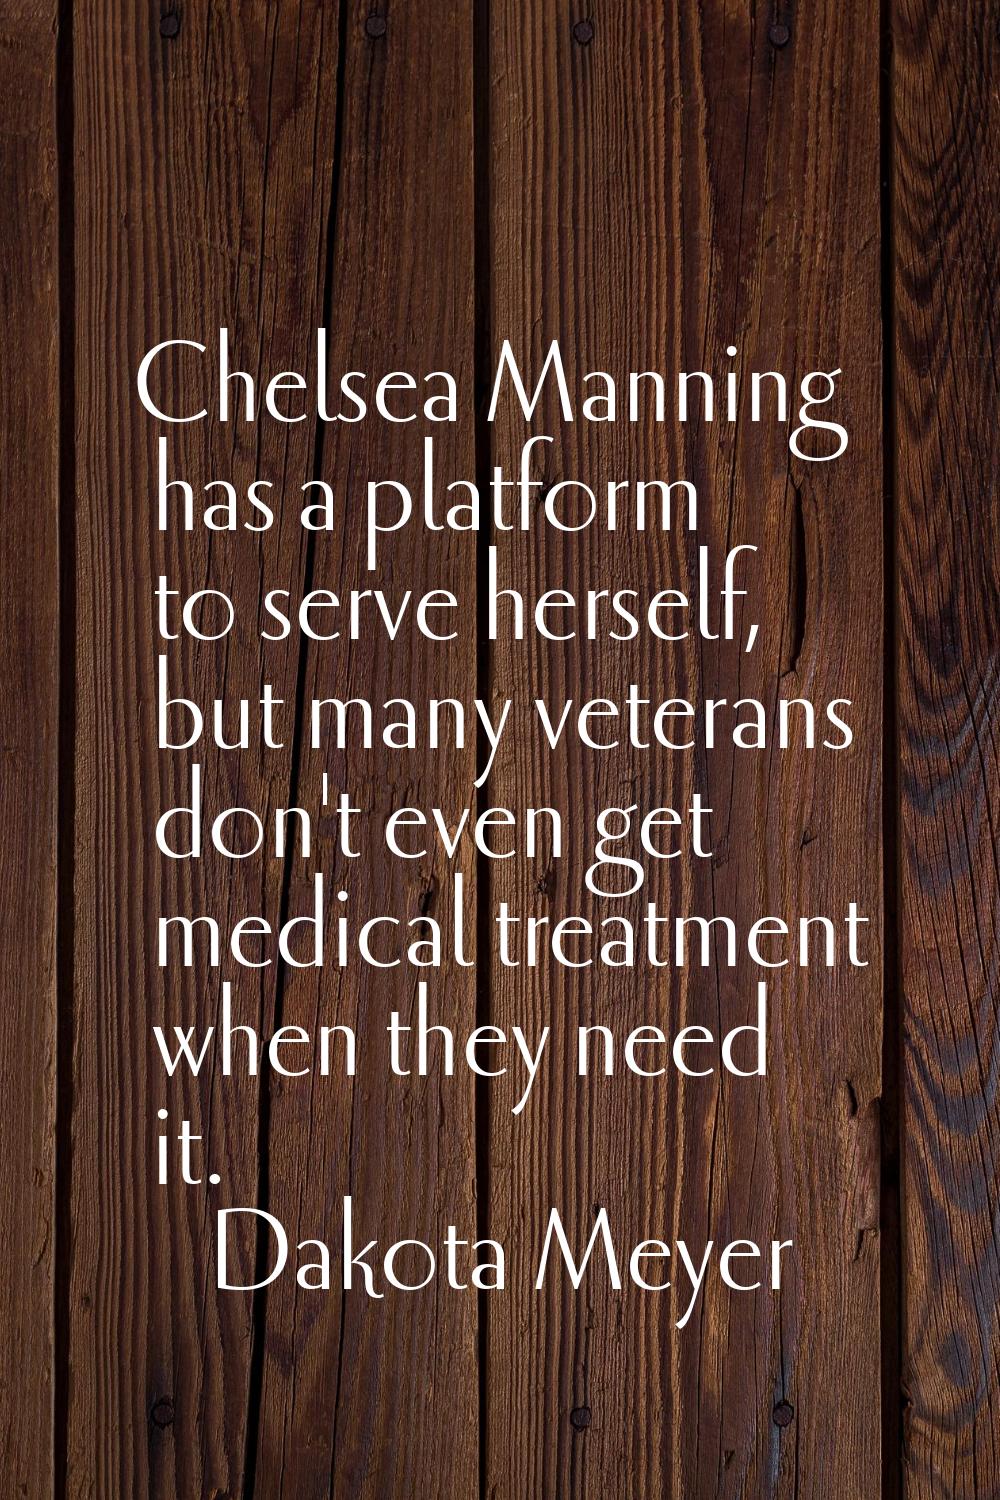 Chelsea Manning has a platform to serve herself, but many veterans don't even get medical treatment